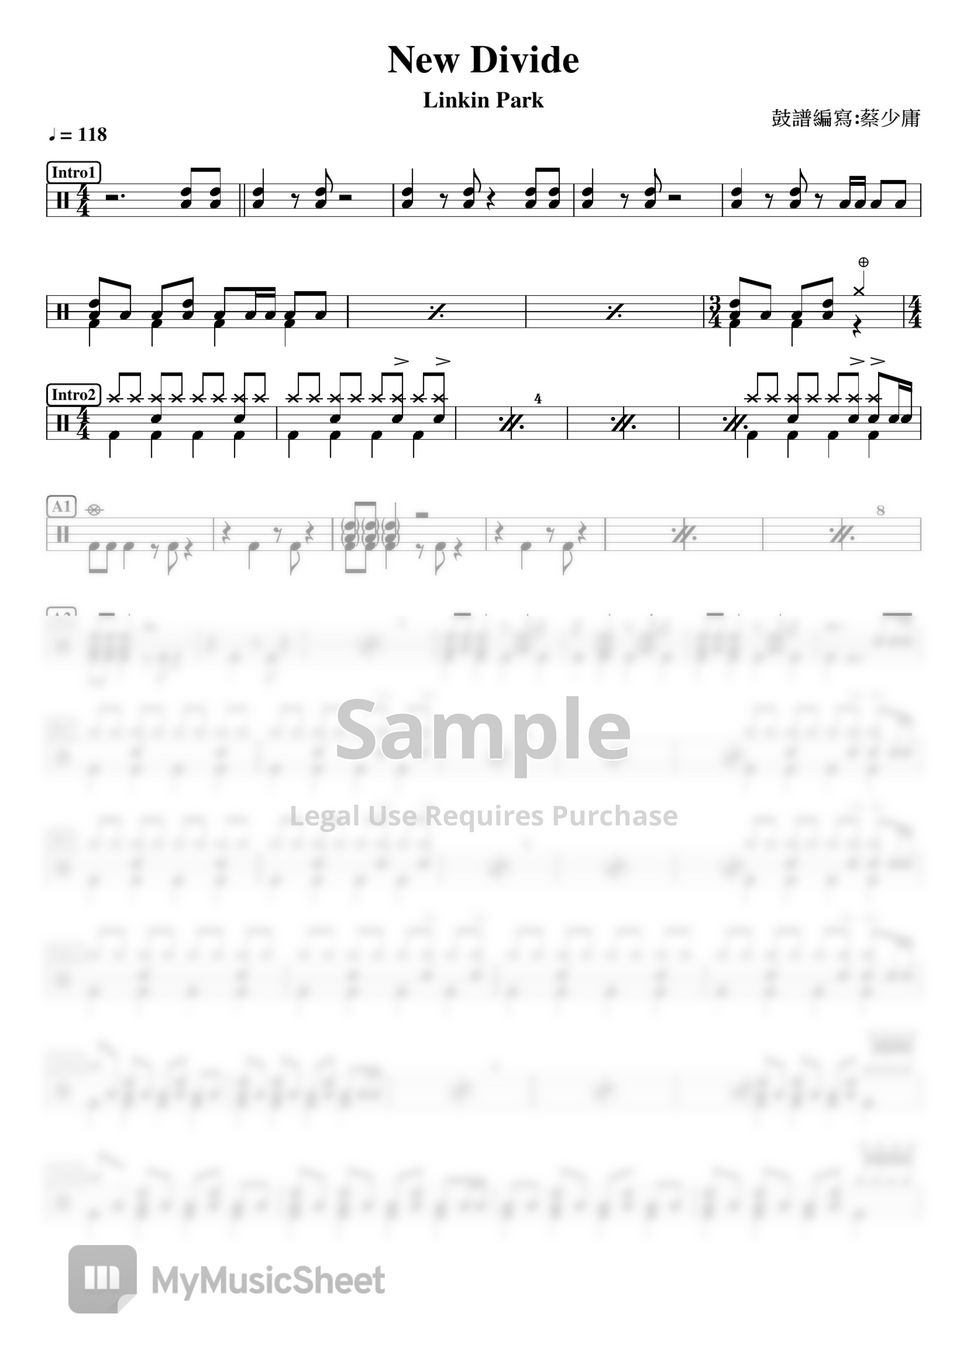 Linkin Park New Divide Sheets By Drummerfrank